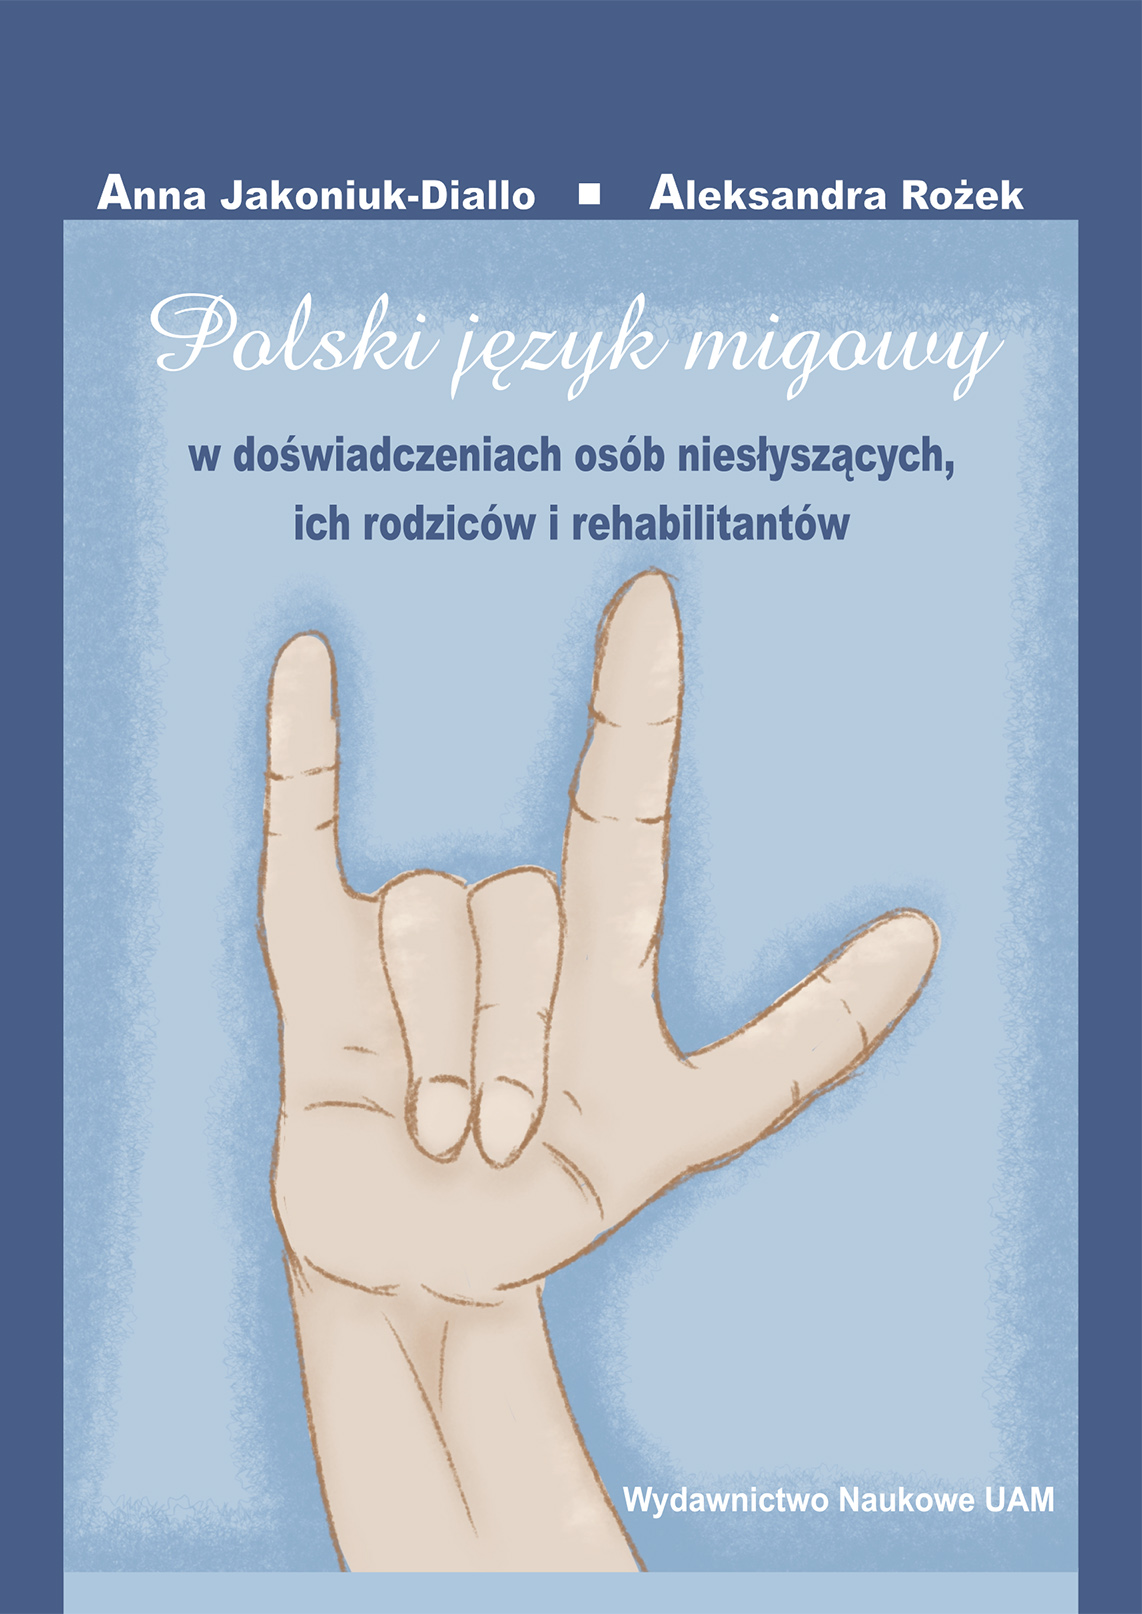 Polish Sign Language in the Experiences of People with Hearing Impairment, their Parents and Rehabilitators